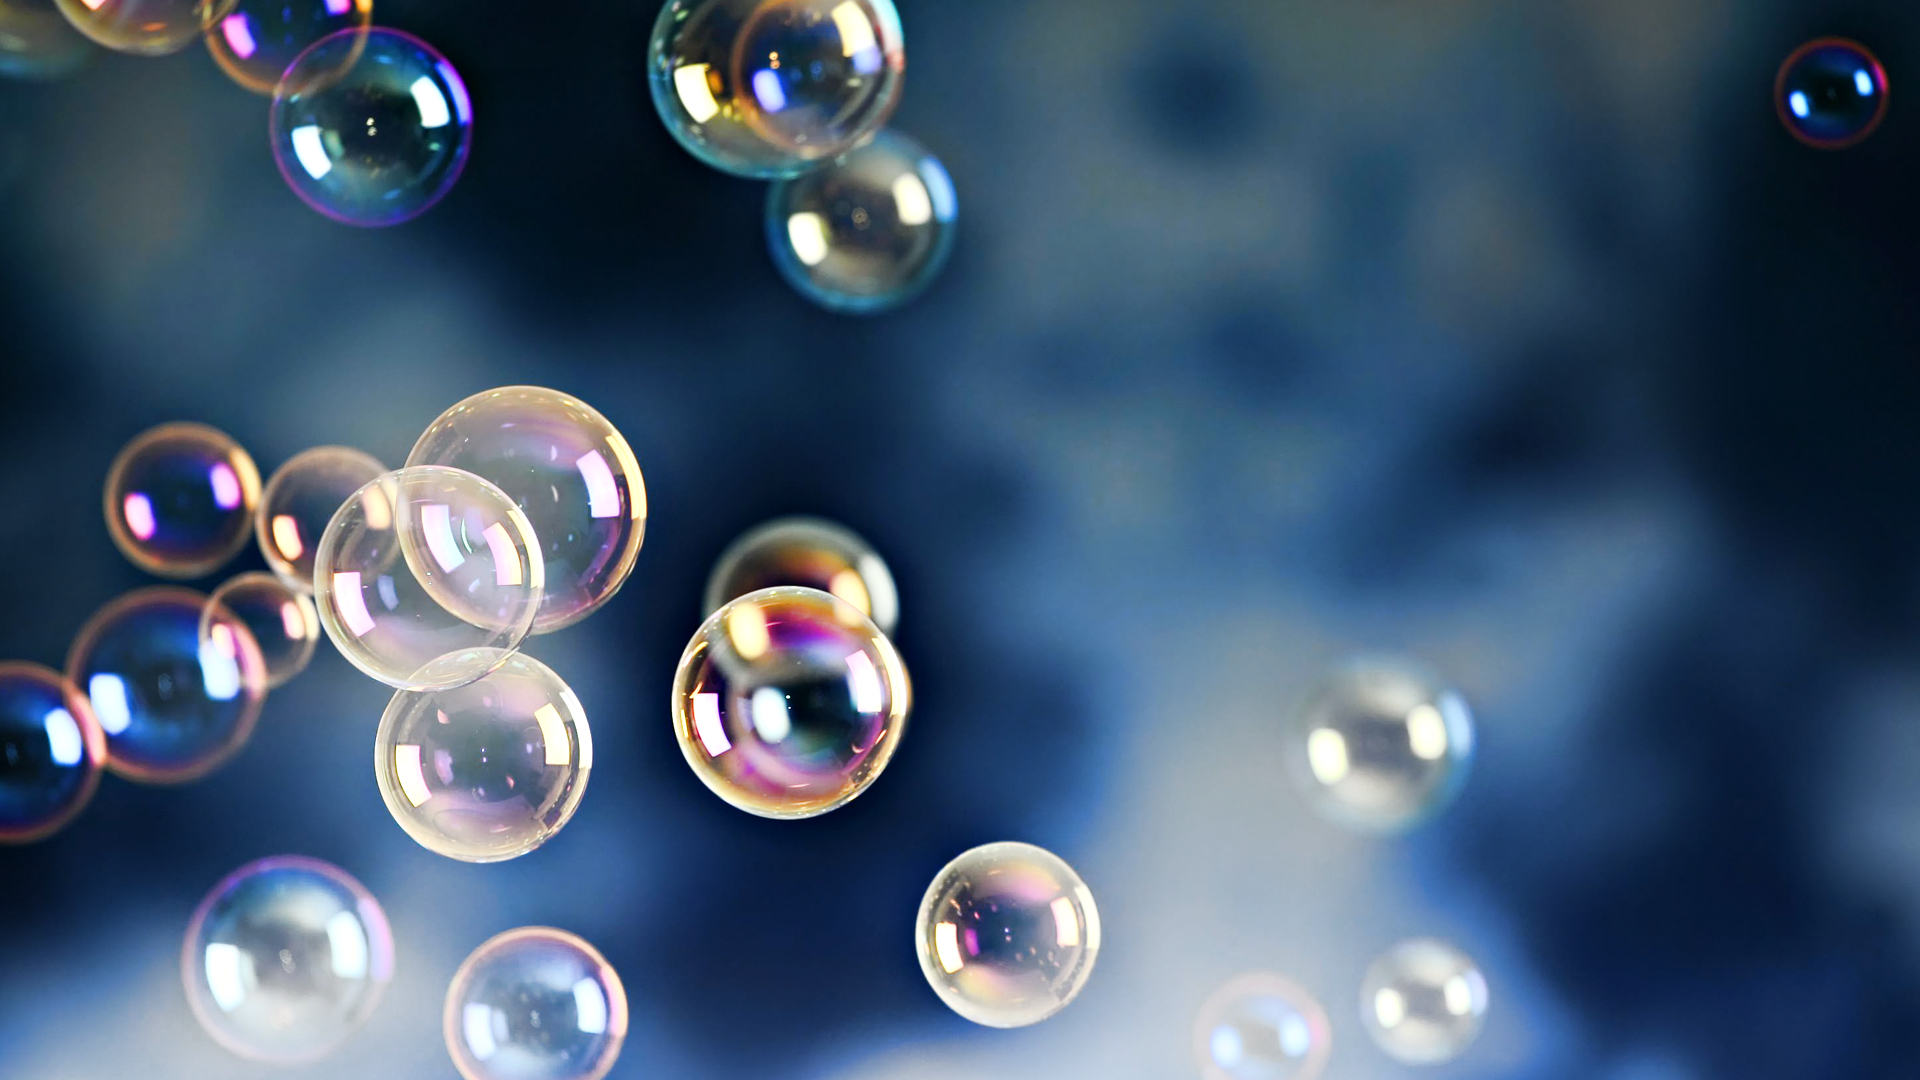 Bubbles Wallpaper HD Background Image Photos Pictures Yl